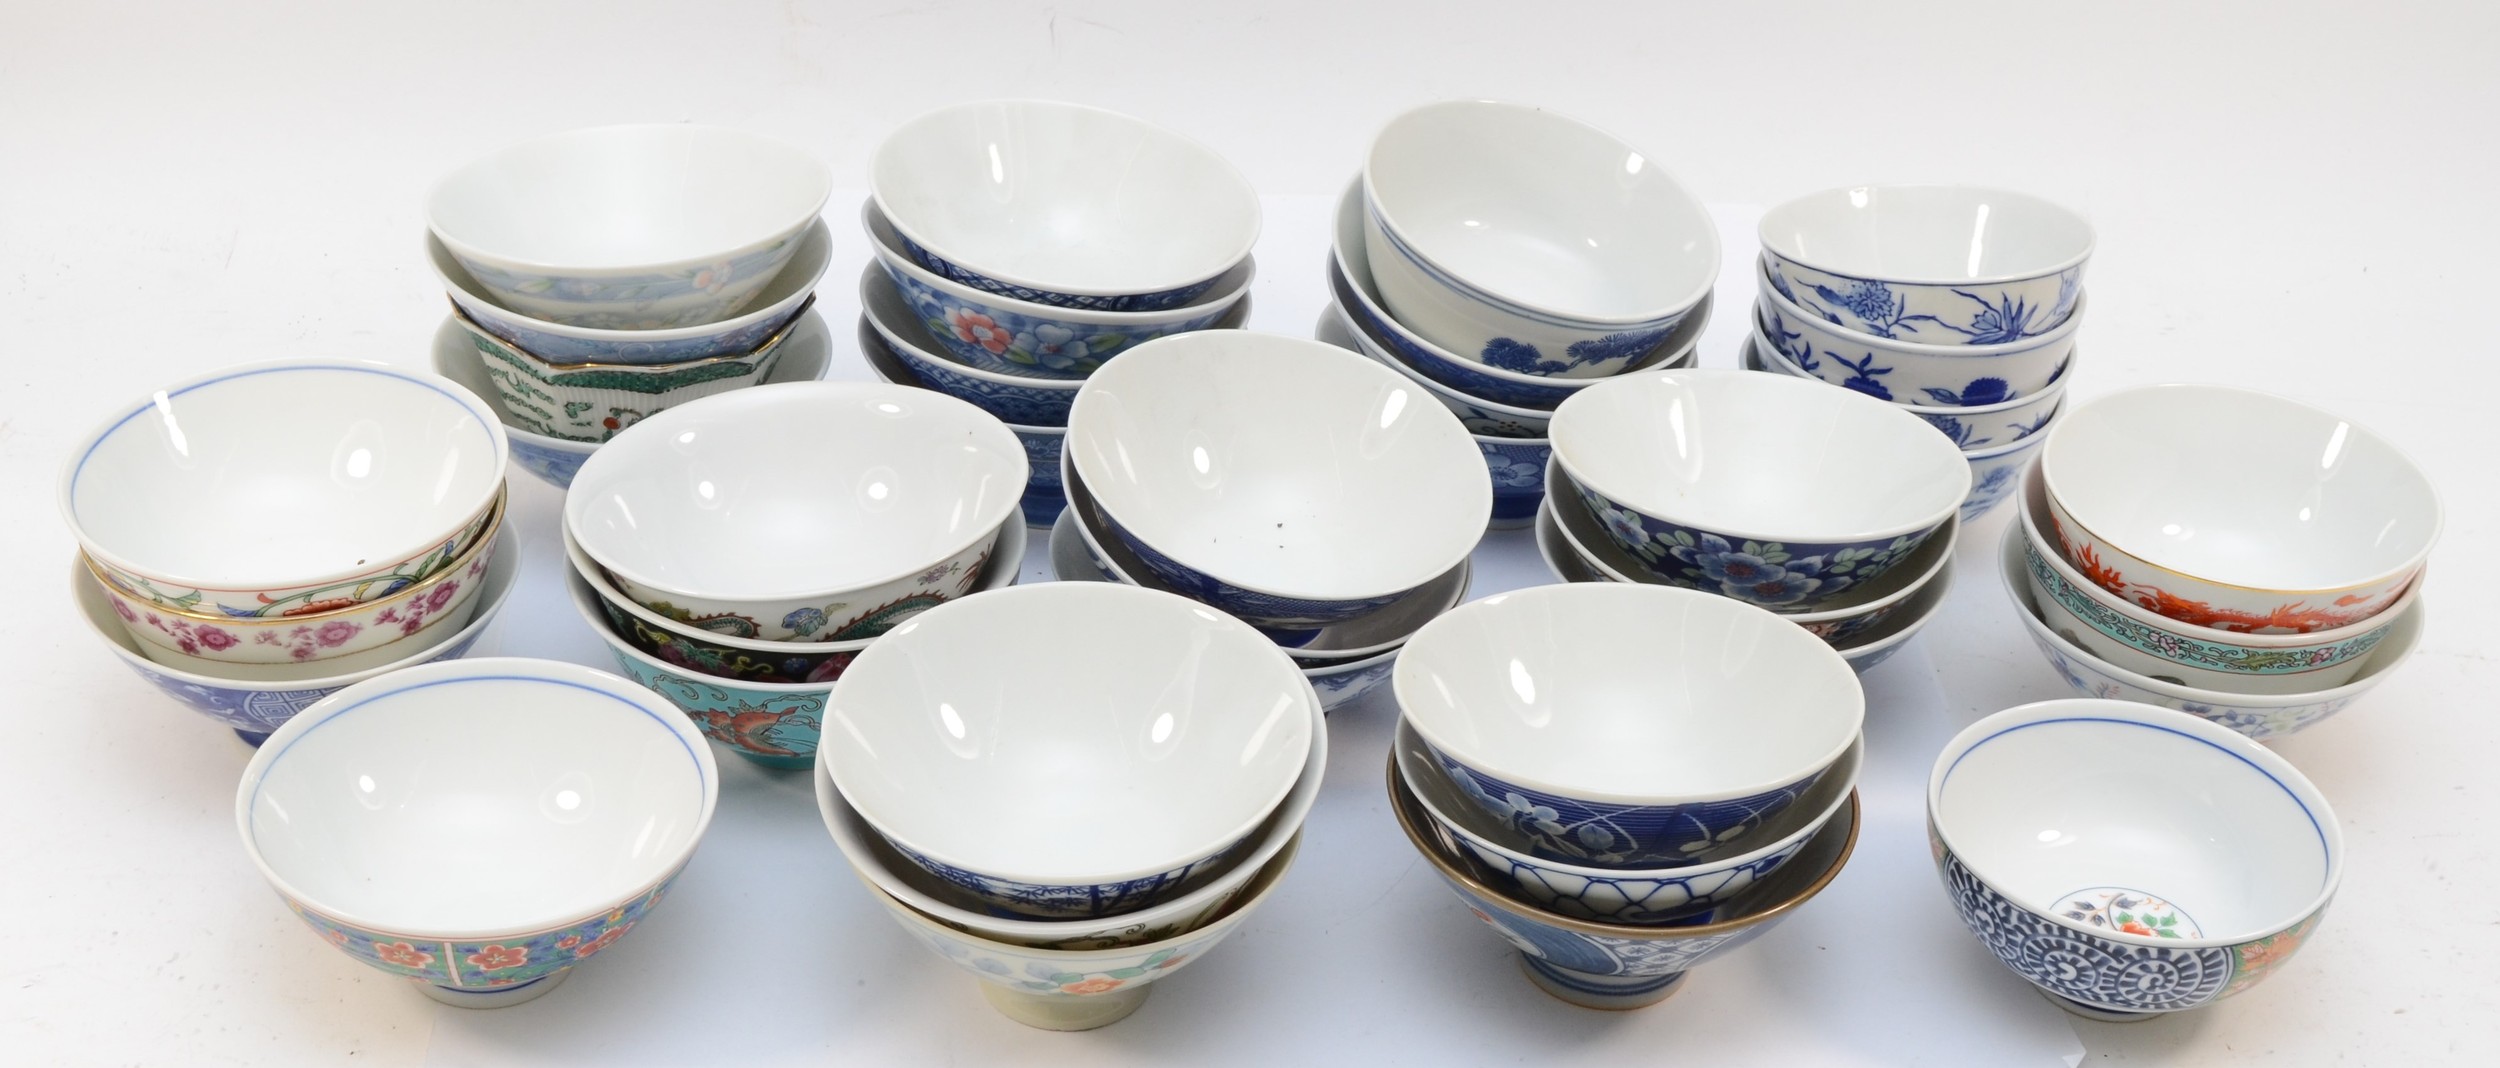 A collection of 20th century Chinese tea bowls.